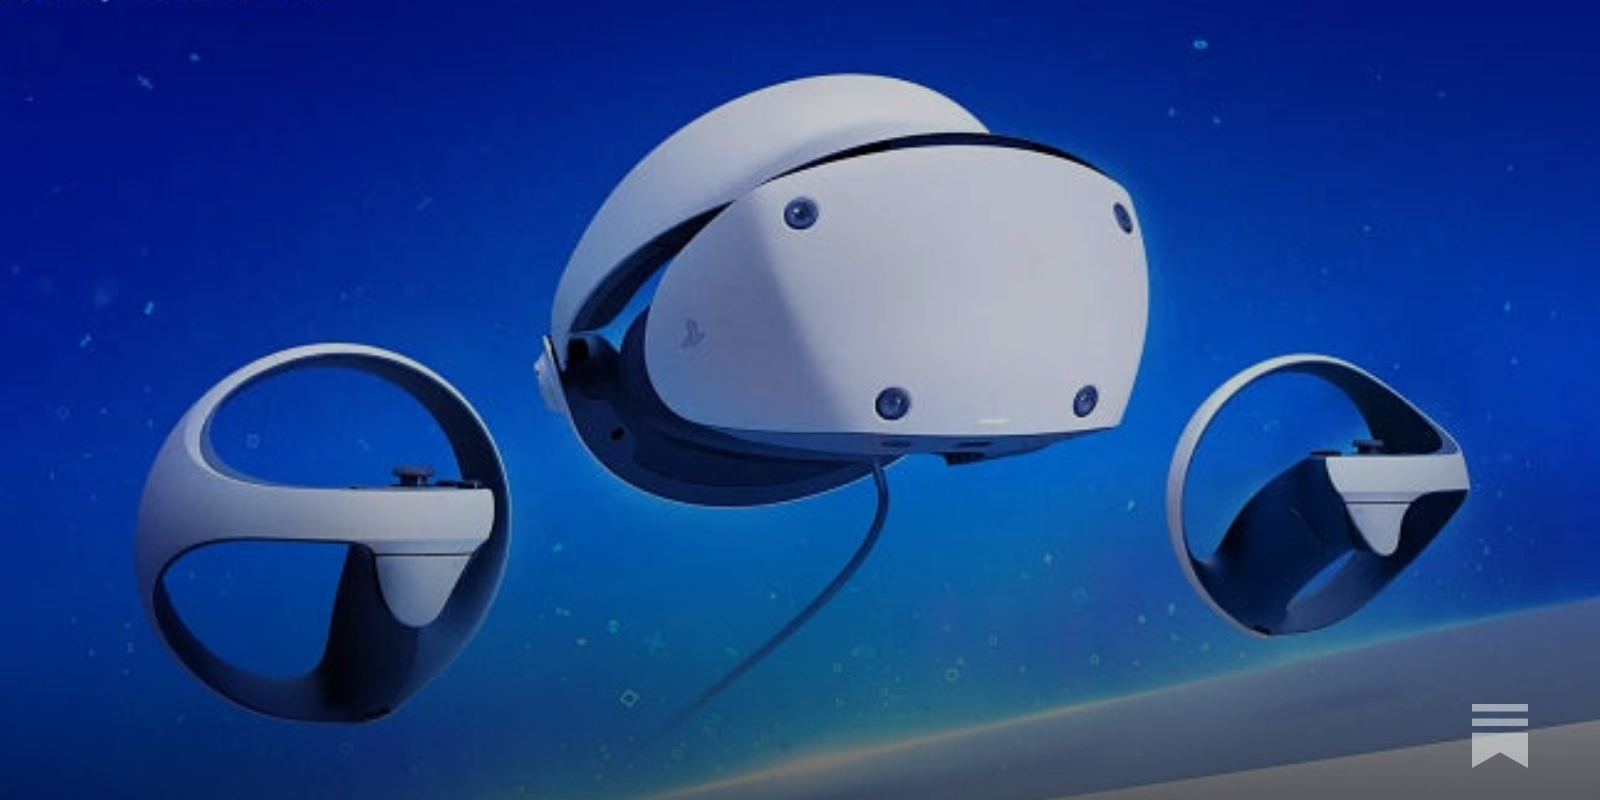 PlayStation VR2: $549 price, releases in February, pre-orders